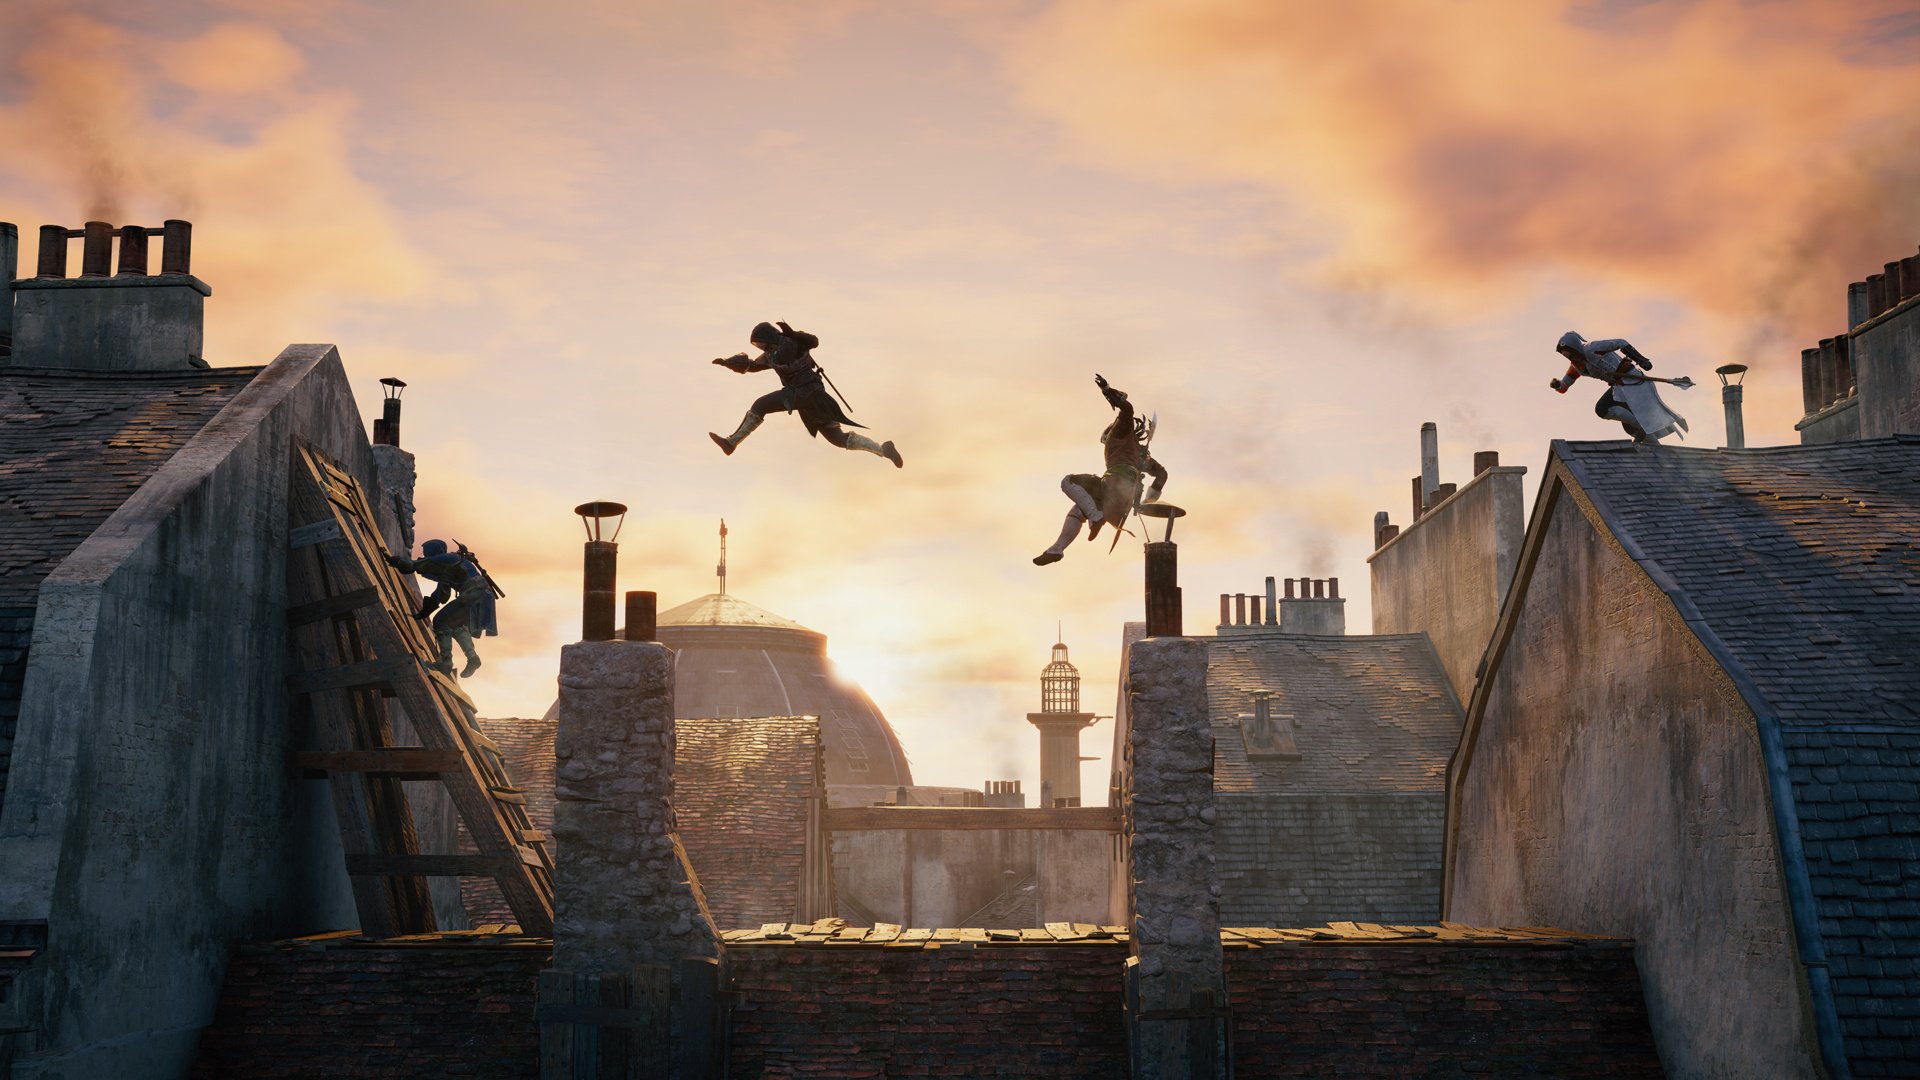 Assassin's Creed Unity Review (PS4)